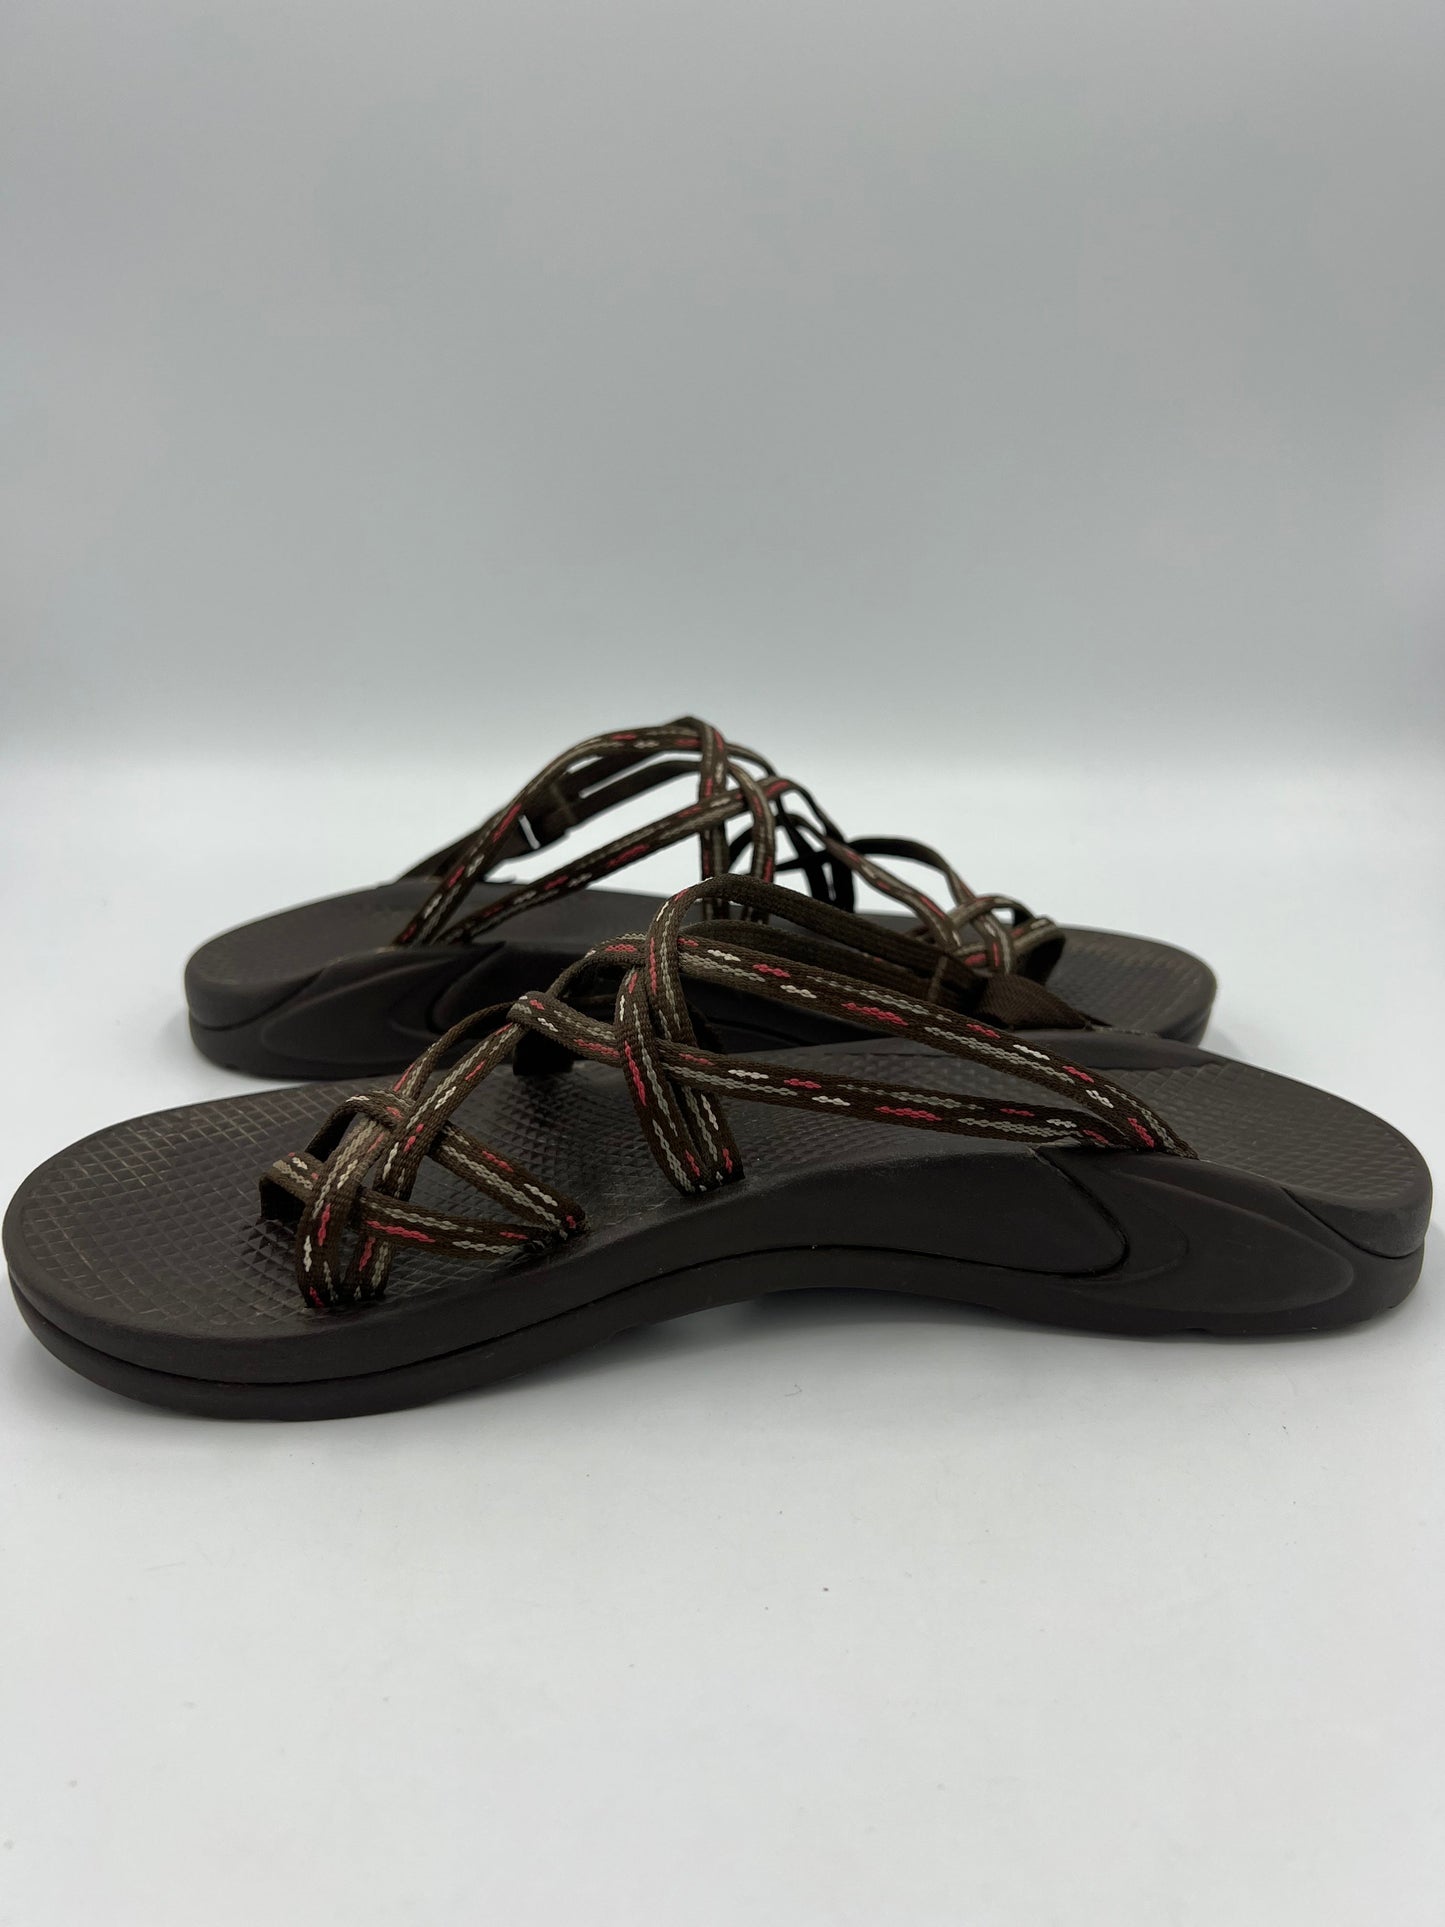 Sandals Designer By Chacos  Size: 11